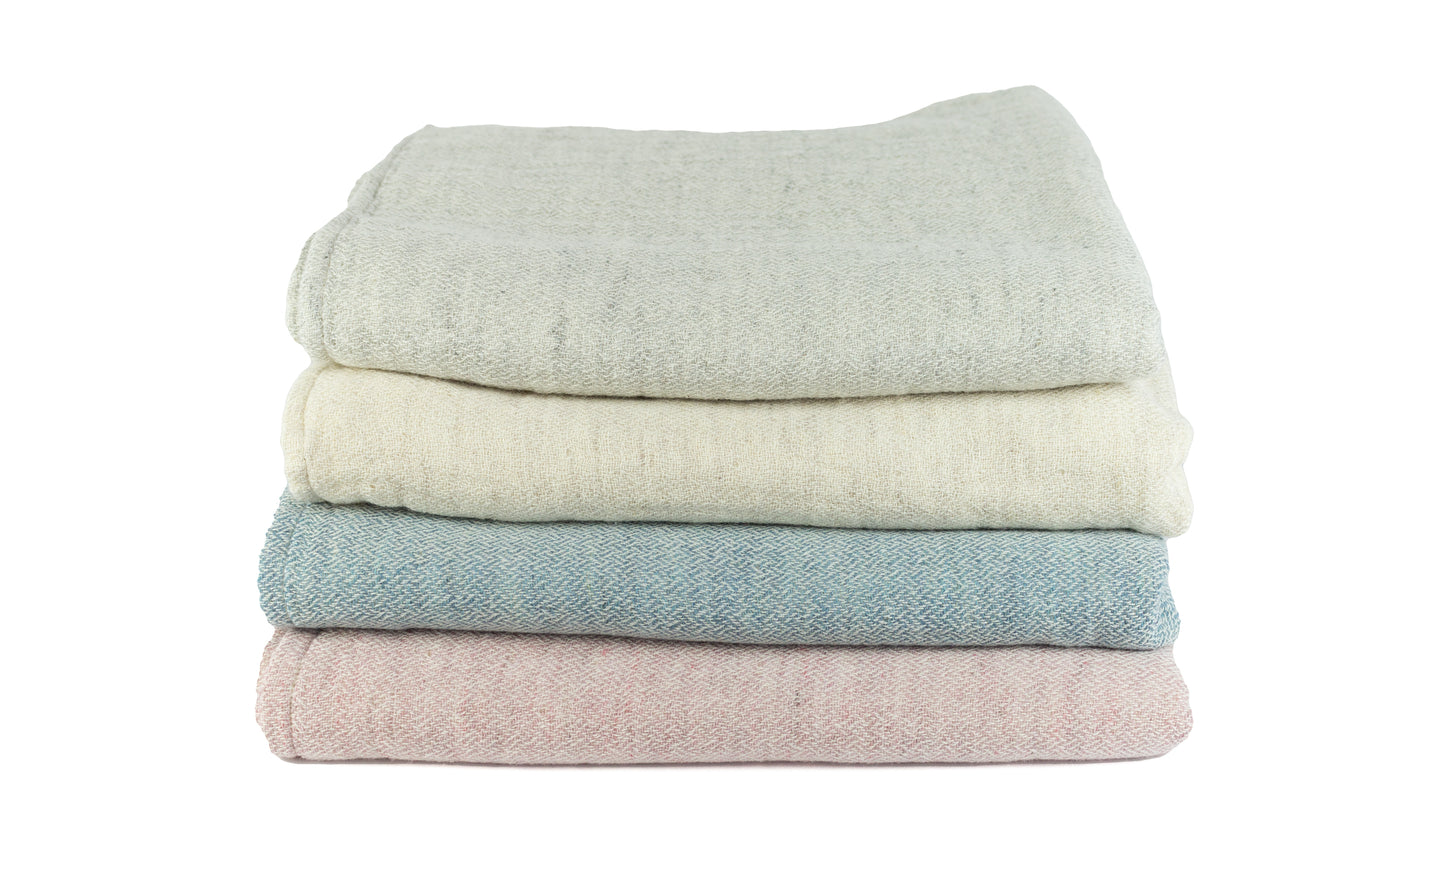 Claire blue - Organic Cotton Terry Towel